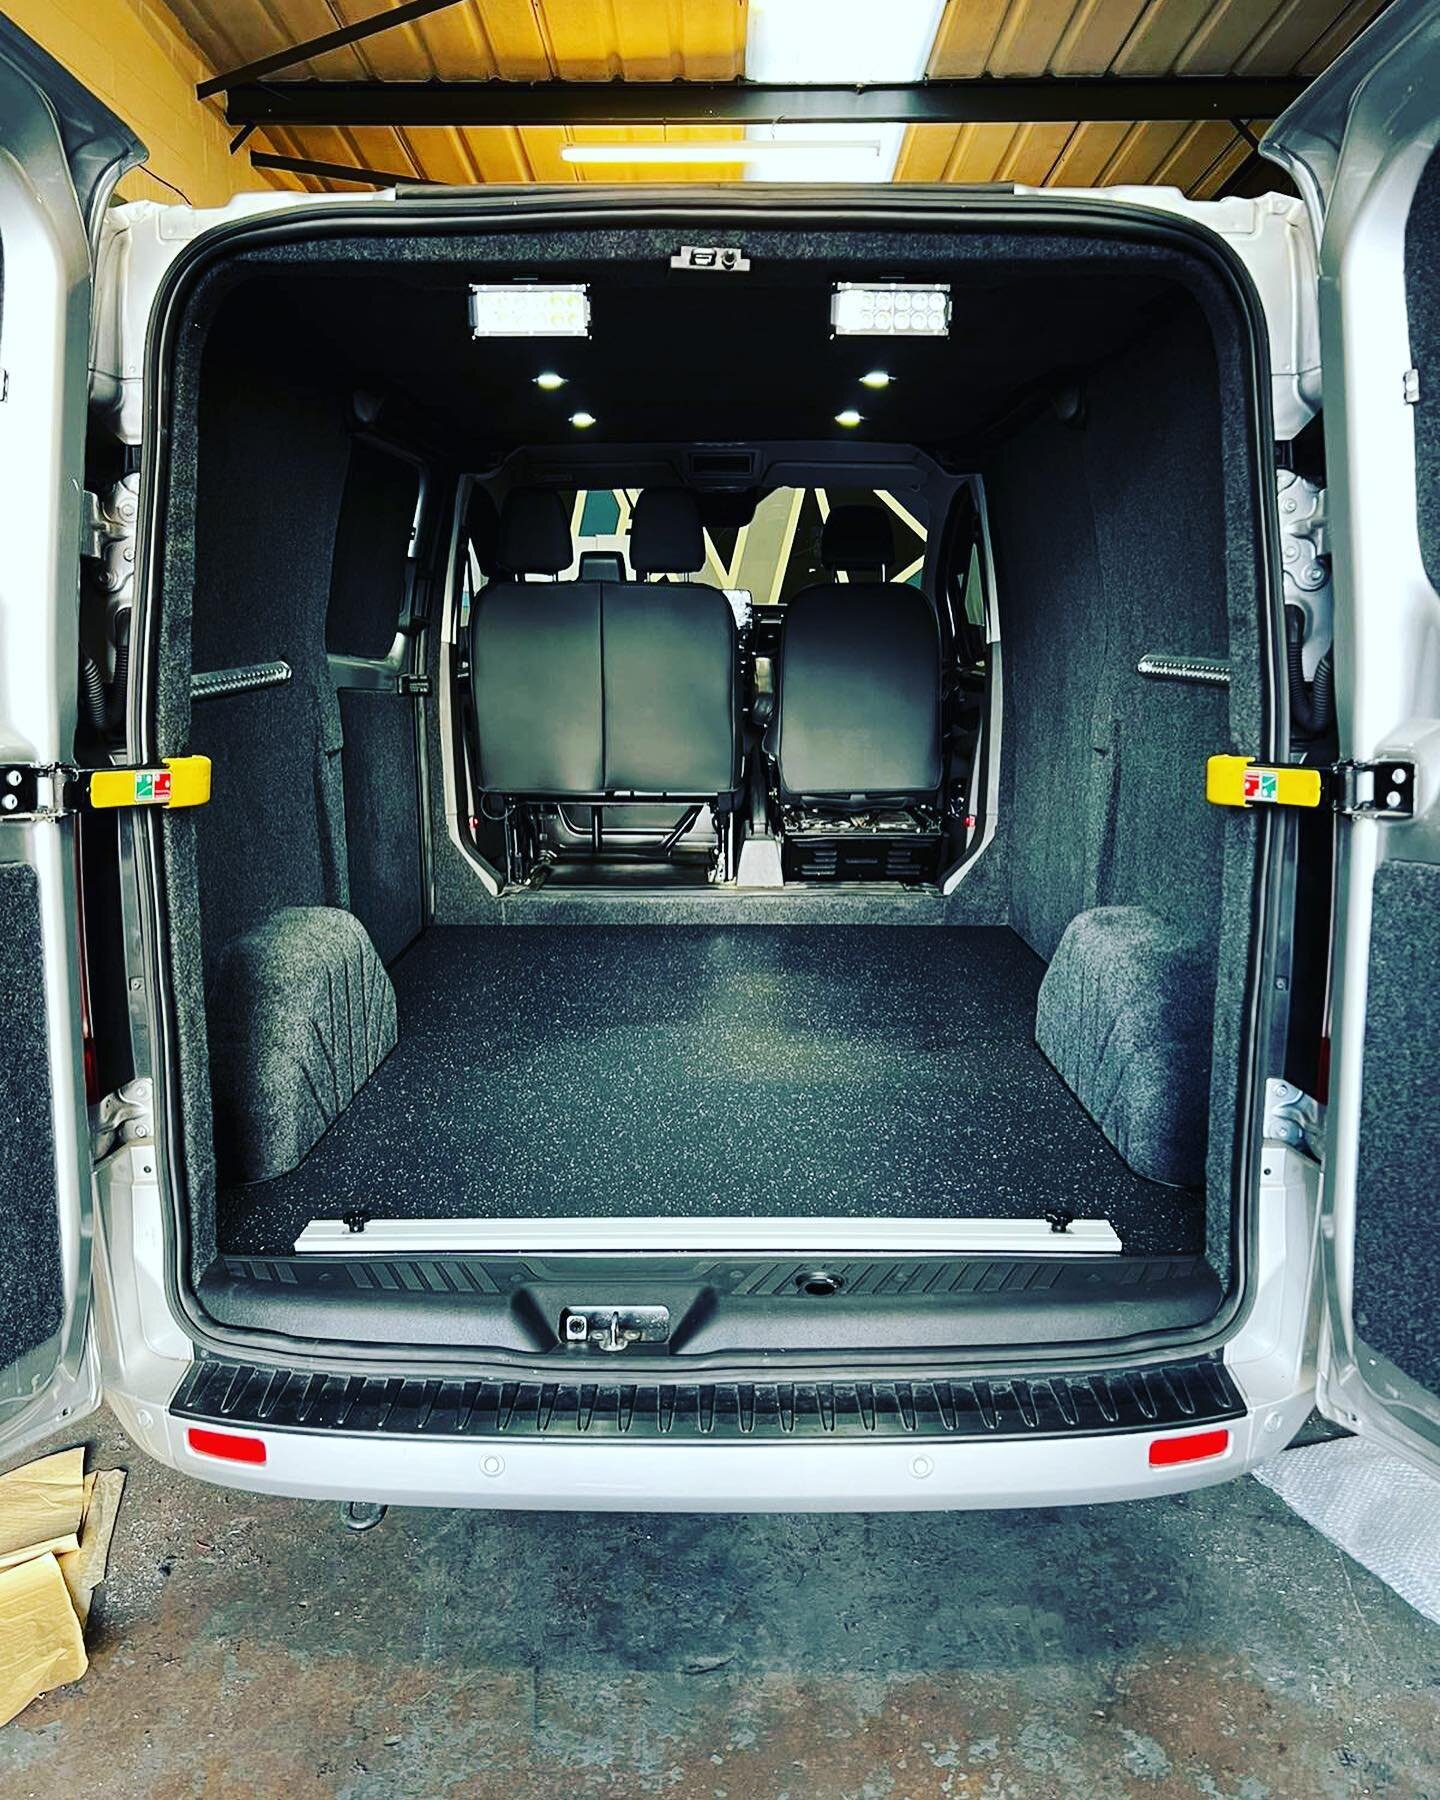 Check This Transit Custom ⬇️

▪️Sound Proofed &amp; Insulated
▪️Fully Carpet Lined 
▪️Roof Build with 6 LED Downlights
▪️New Altro Floor with step
▪️Rear Door Twin LED Spotlights 

Ready for some biking adventures! 
@seanjopson @loadedbikes 

Vans Do